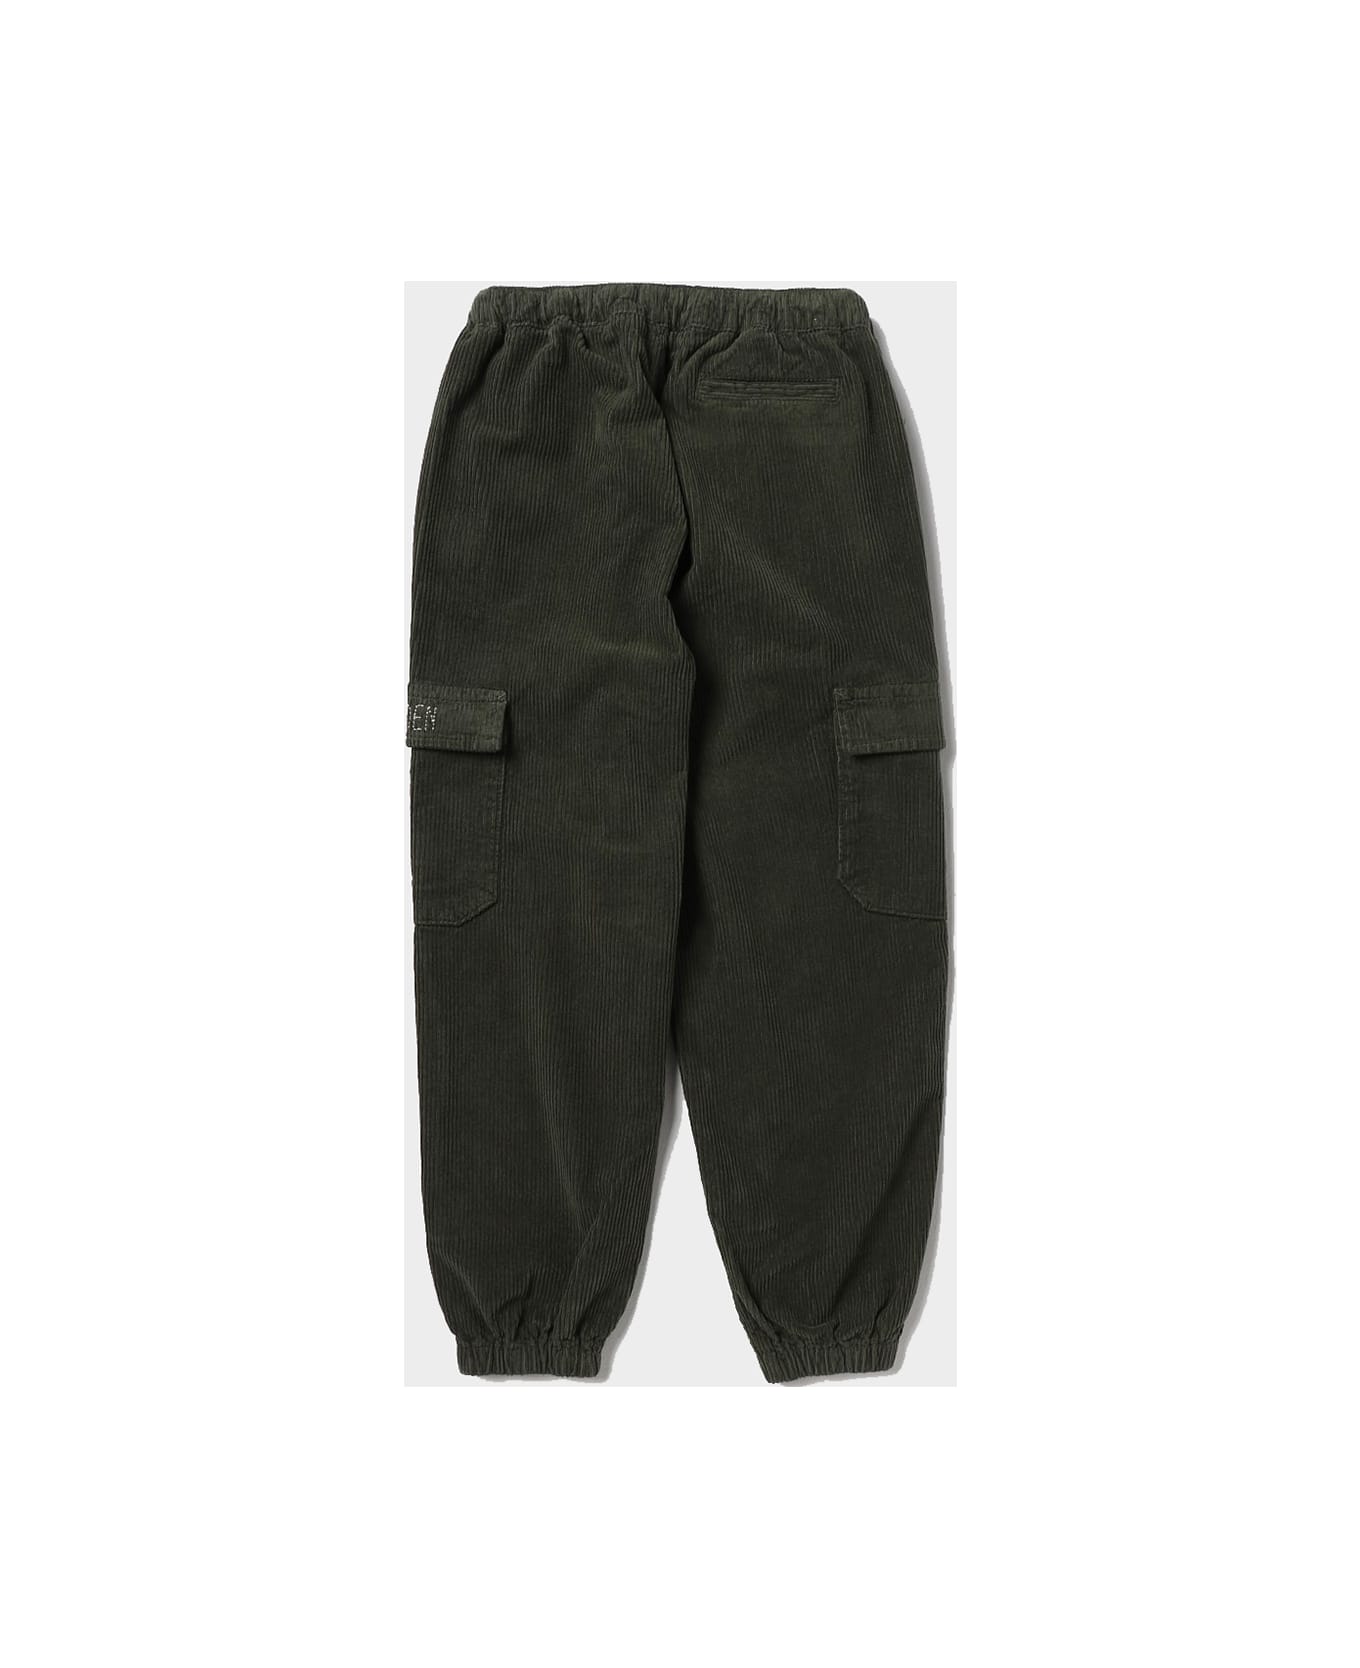 Golden Goose Green Cotton Pants - IVY GREEN ボトムス